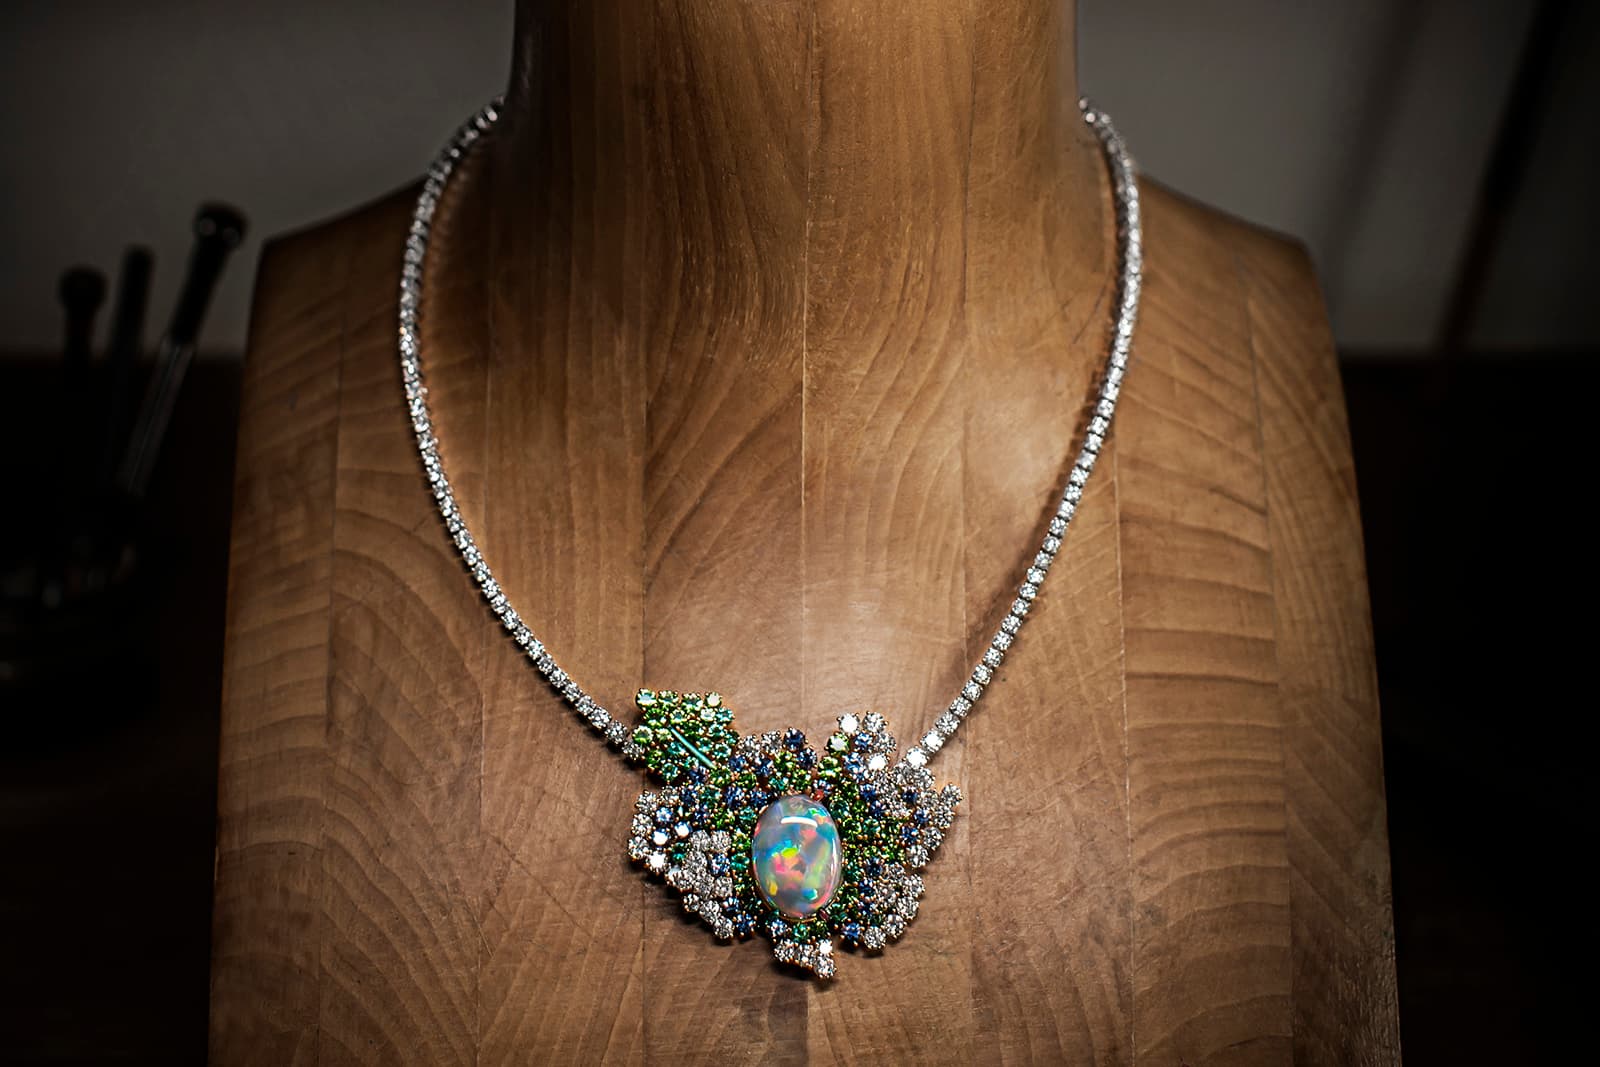 Dior Shows RoseDior High Jewelry Collection in Paris – WWD